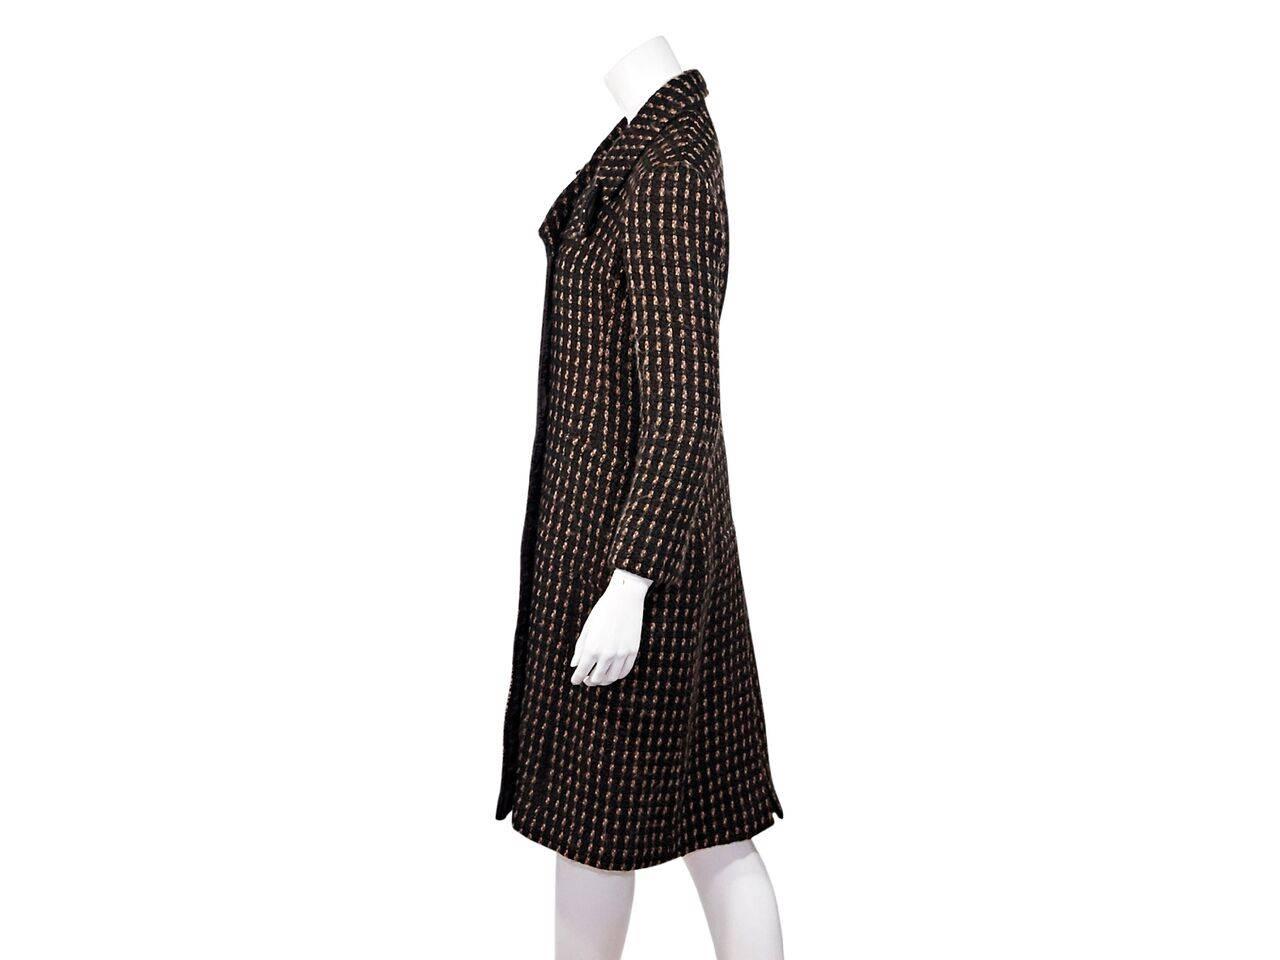 Product details:  Brown check wool coat by Miu Miu.  Oversized notched lapel.  Long sleeves.  Double-breasted button-front closure.  Waist patch pockets.  Back hem vent.  Label size IT 44. 
Condition: Pre-owned. Very good.
Est. Retail $ 798.00